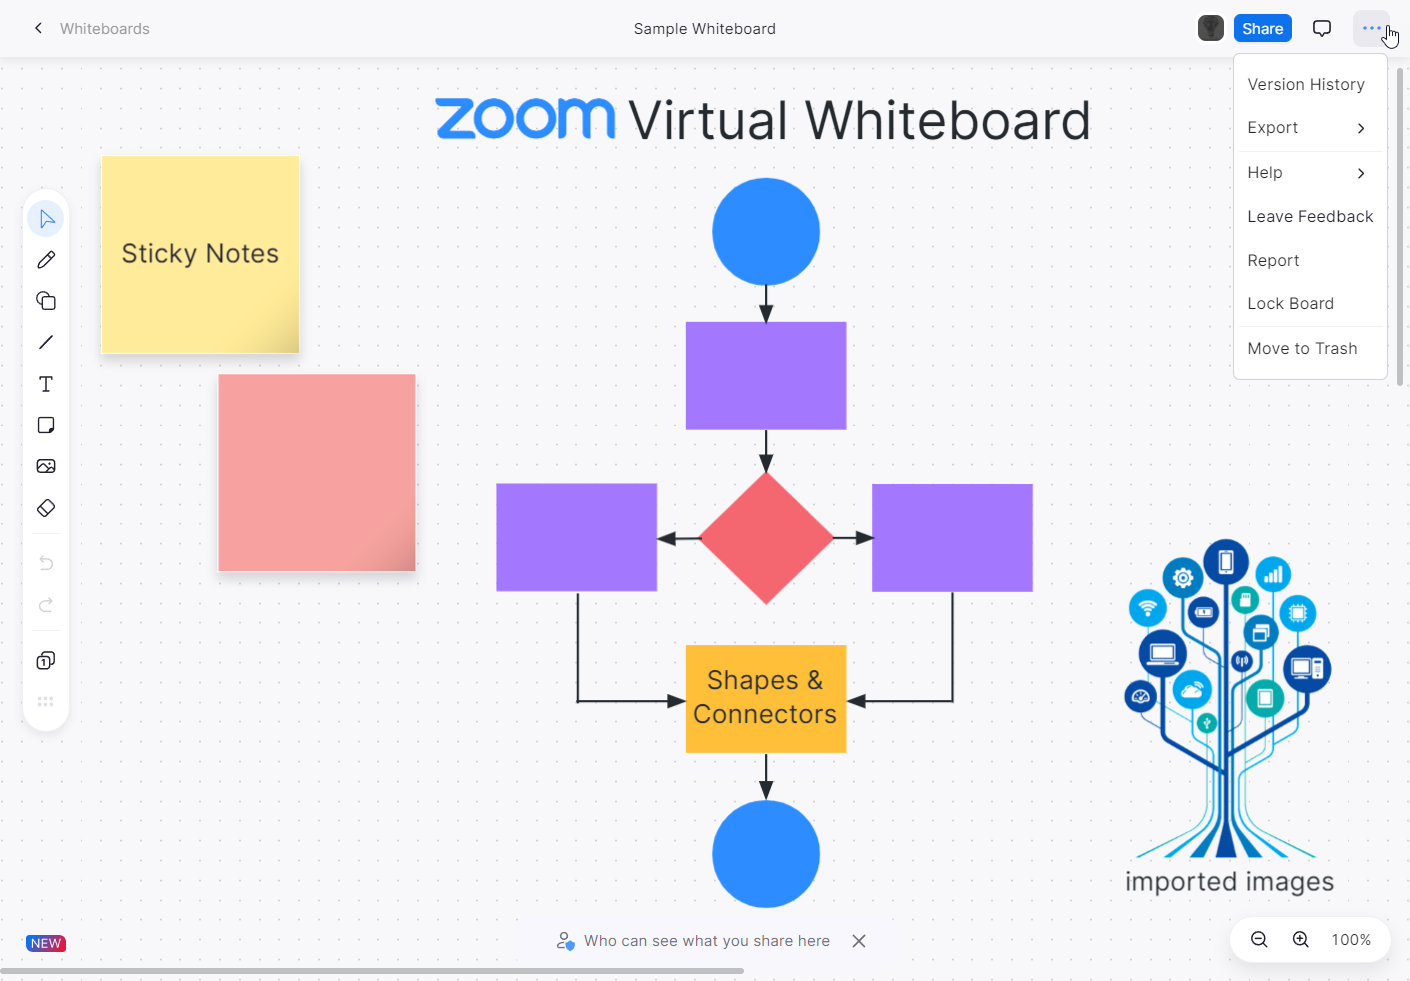 Zoom whiteboard canvas illustrating sticky notes, shapes with smart connectors, imported images, and additional options menu.